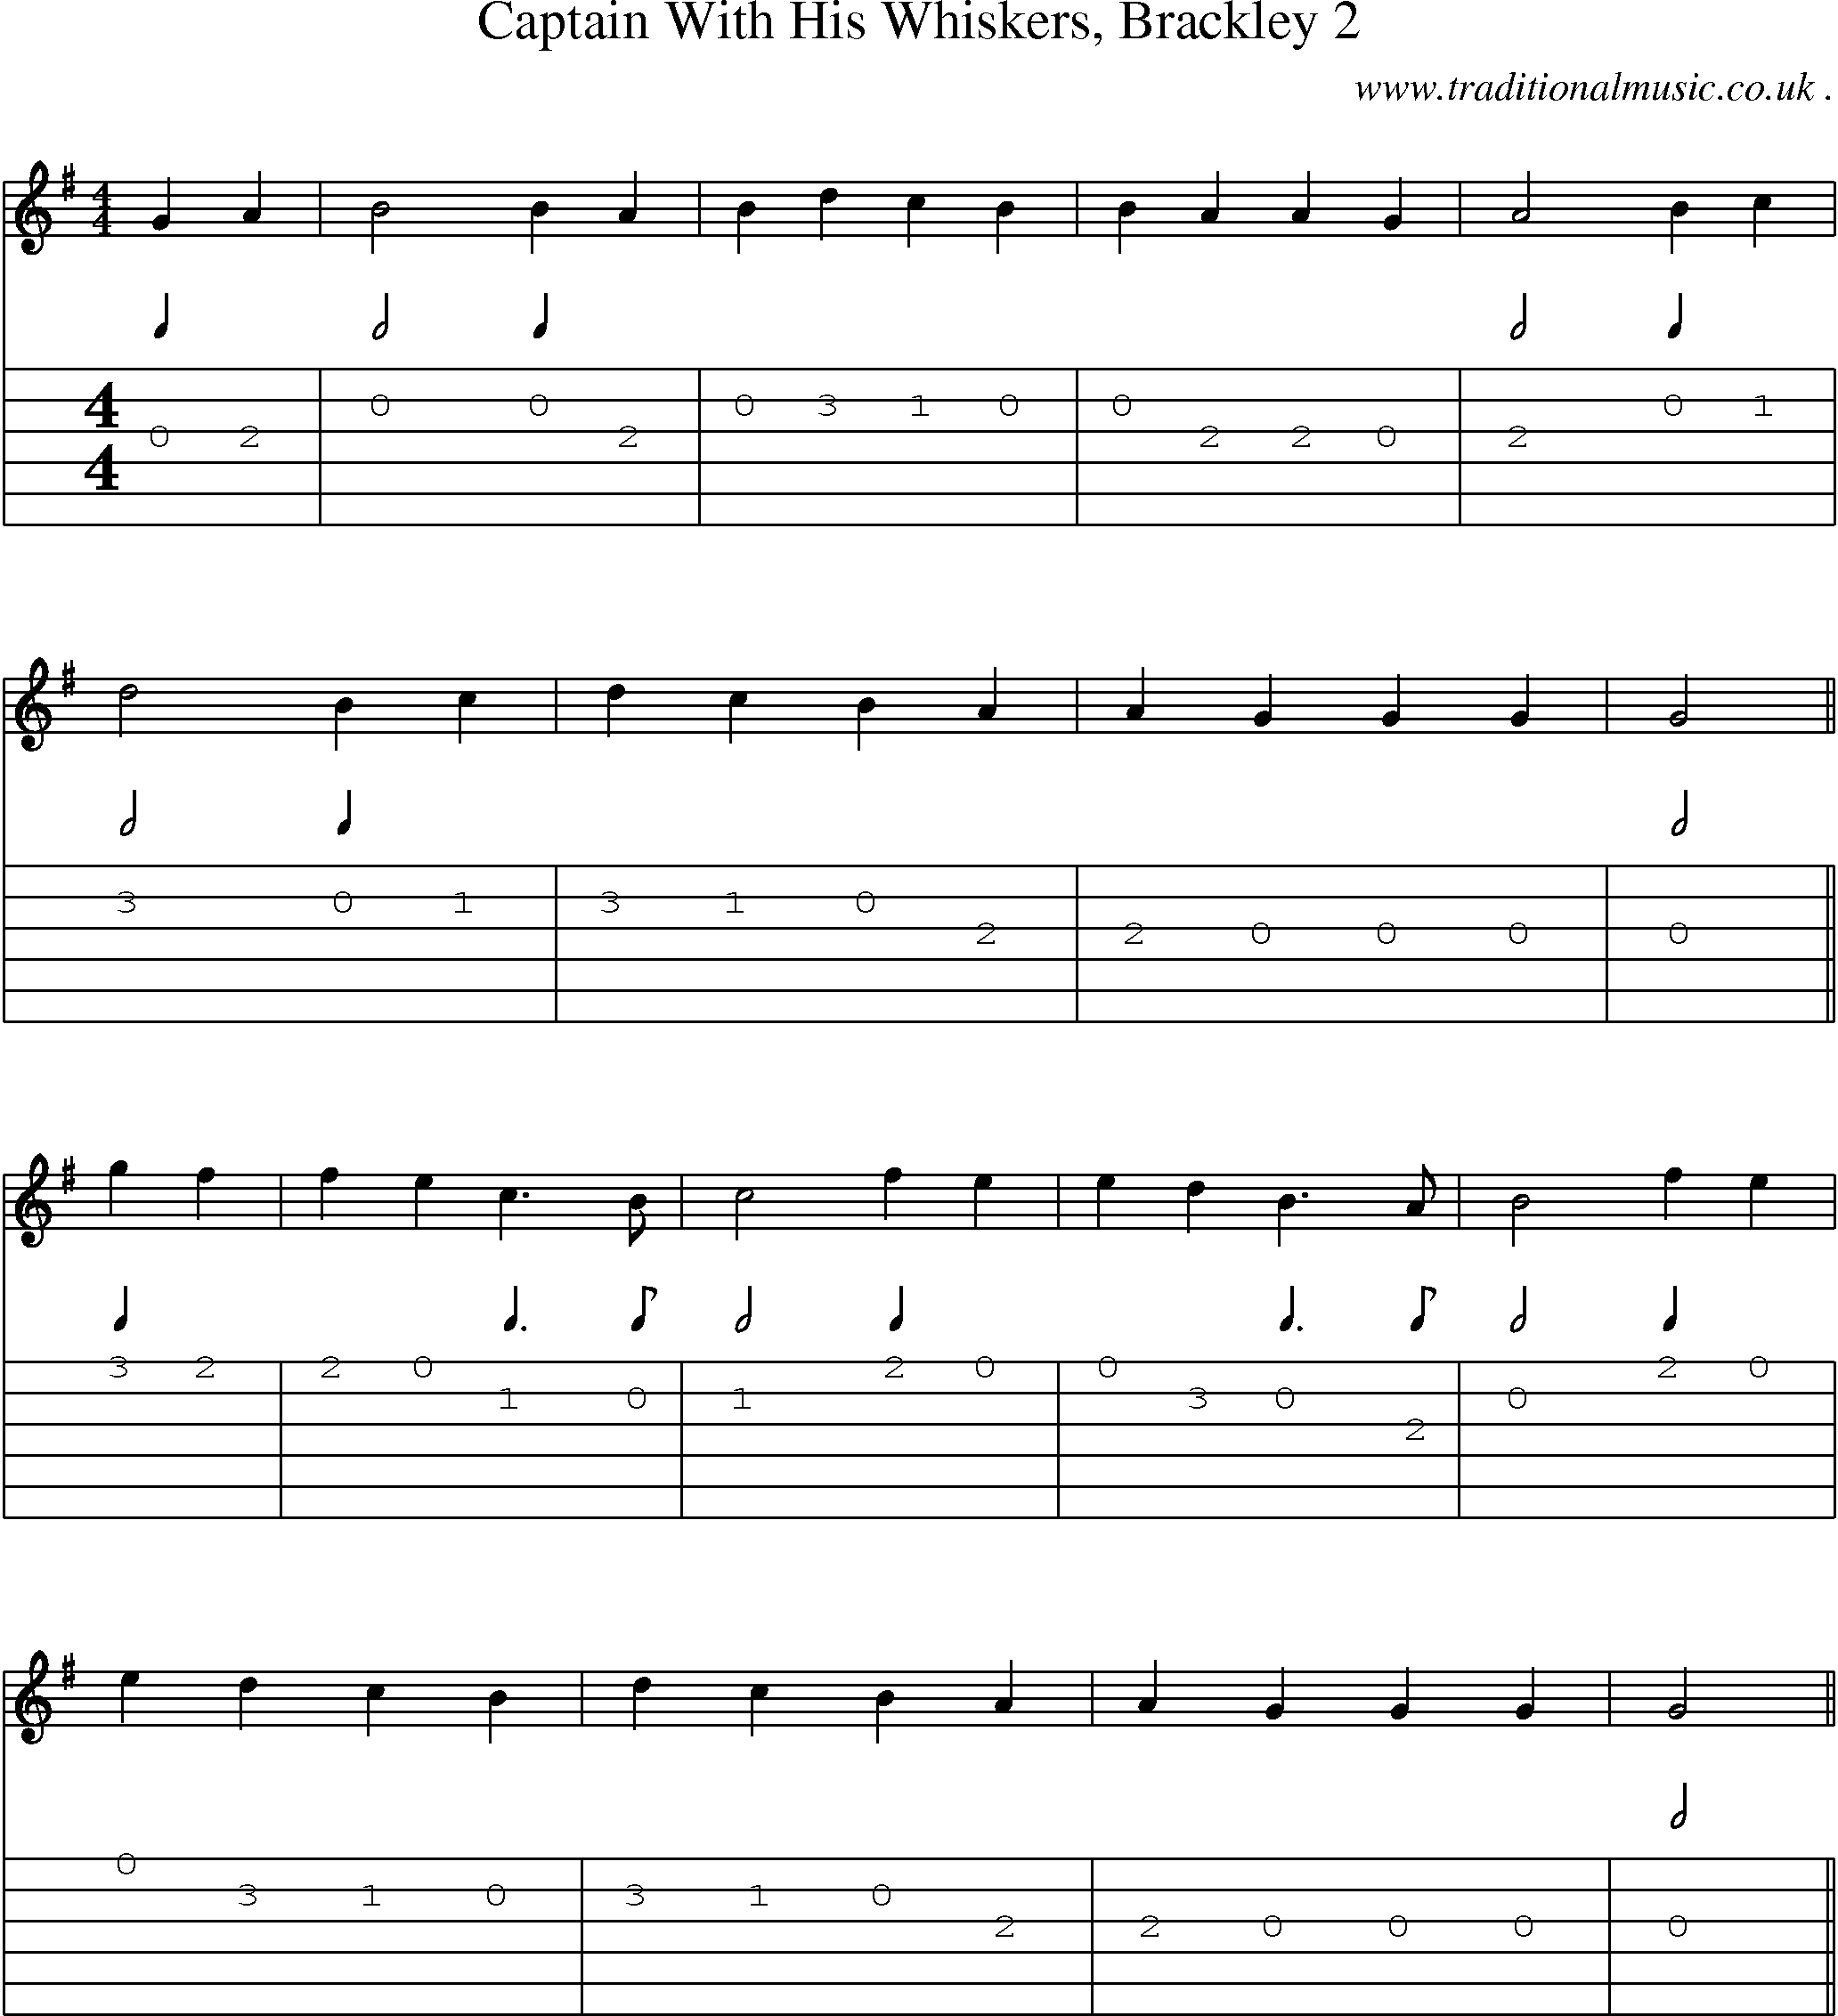 Sheet-Music and Guitar Tabs for Captain With His Whiskers Brackley 2